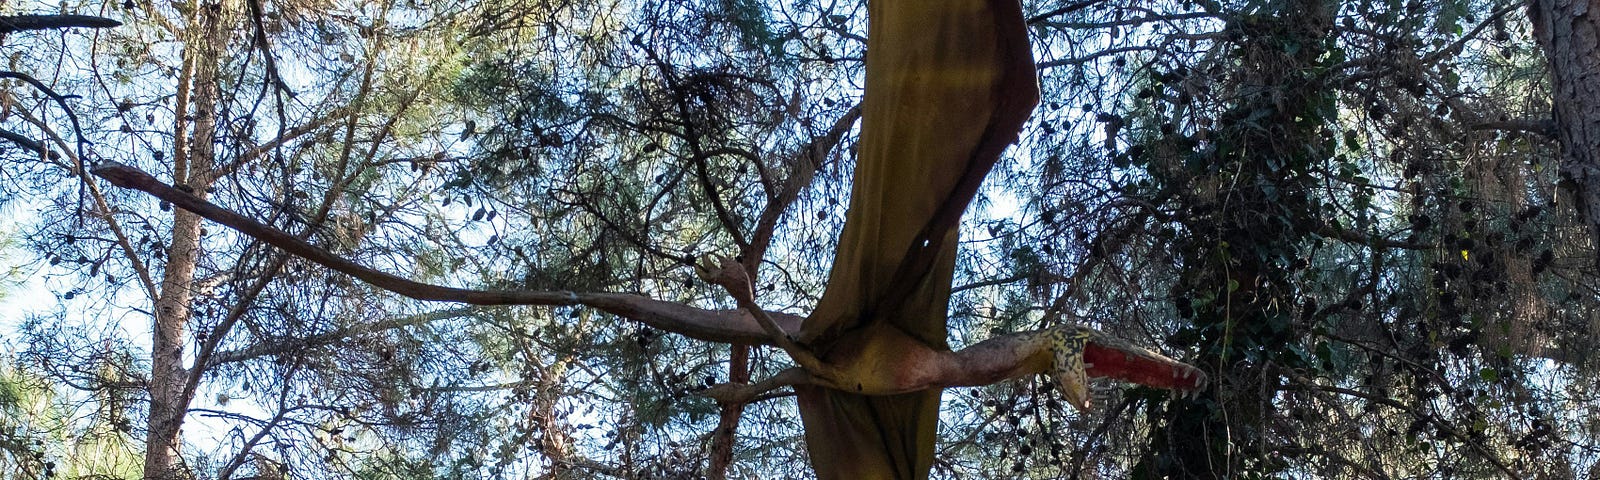 Images of pterodactyls flying among trees